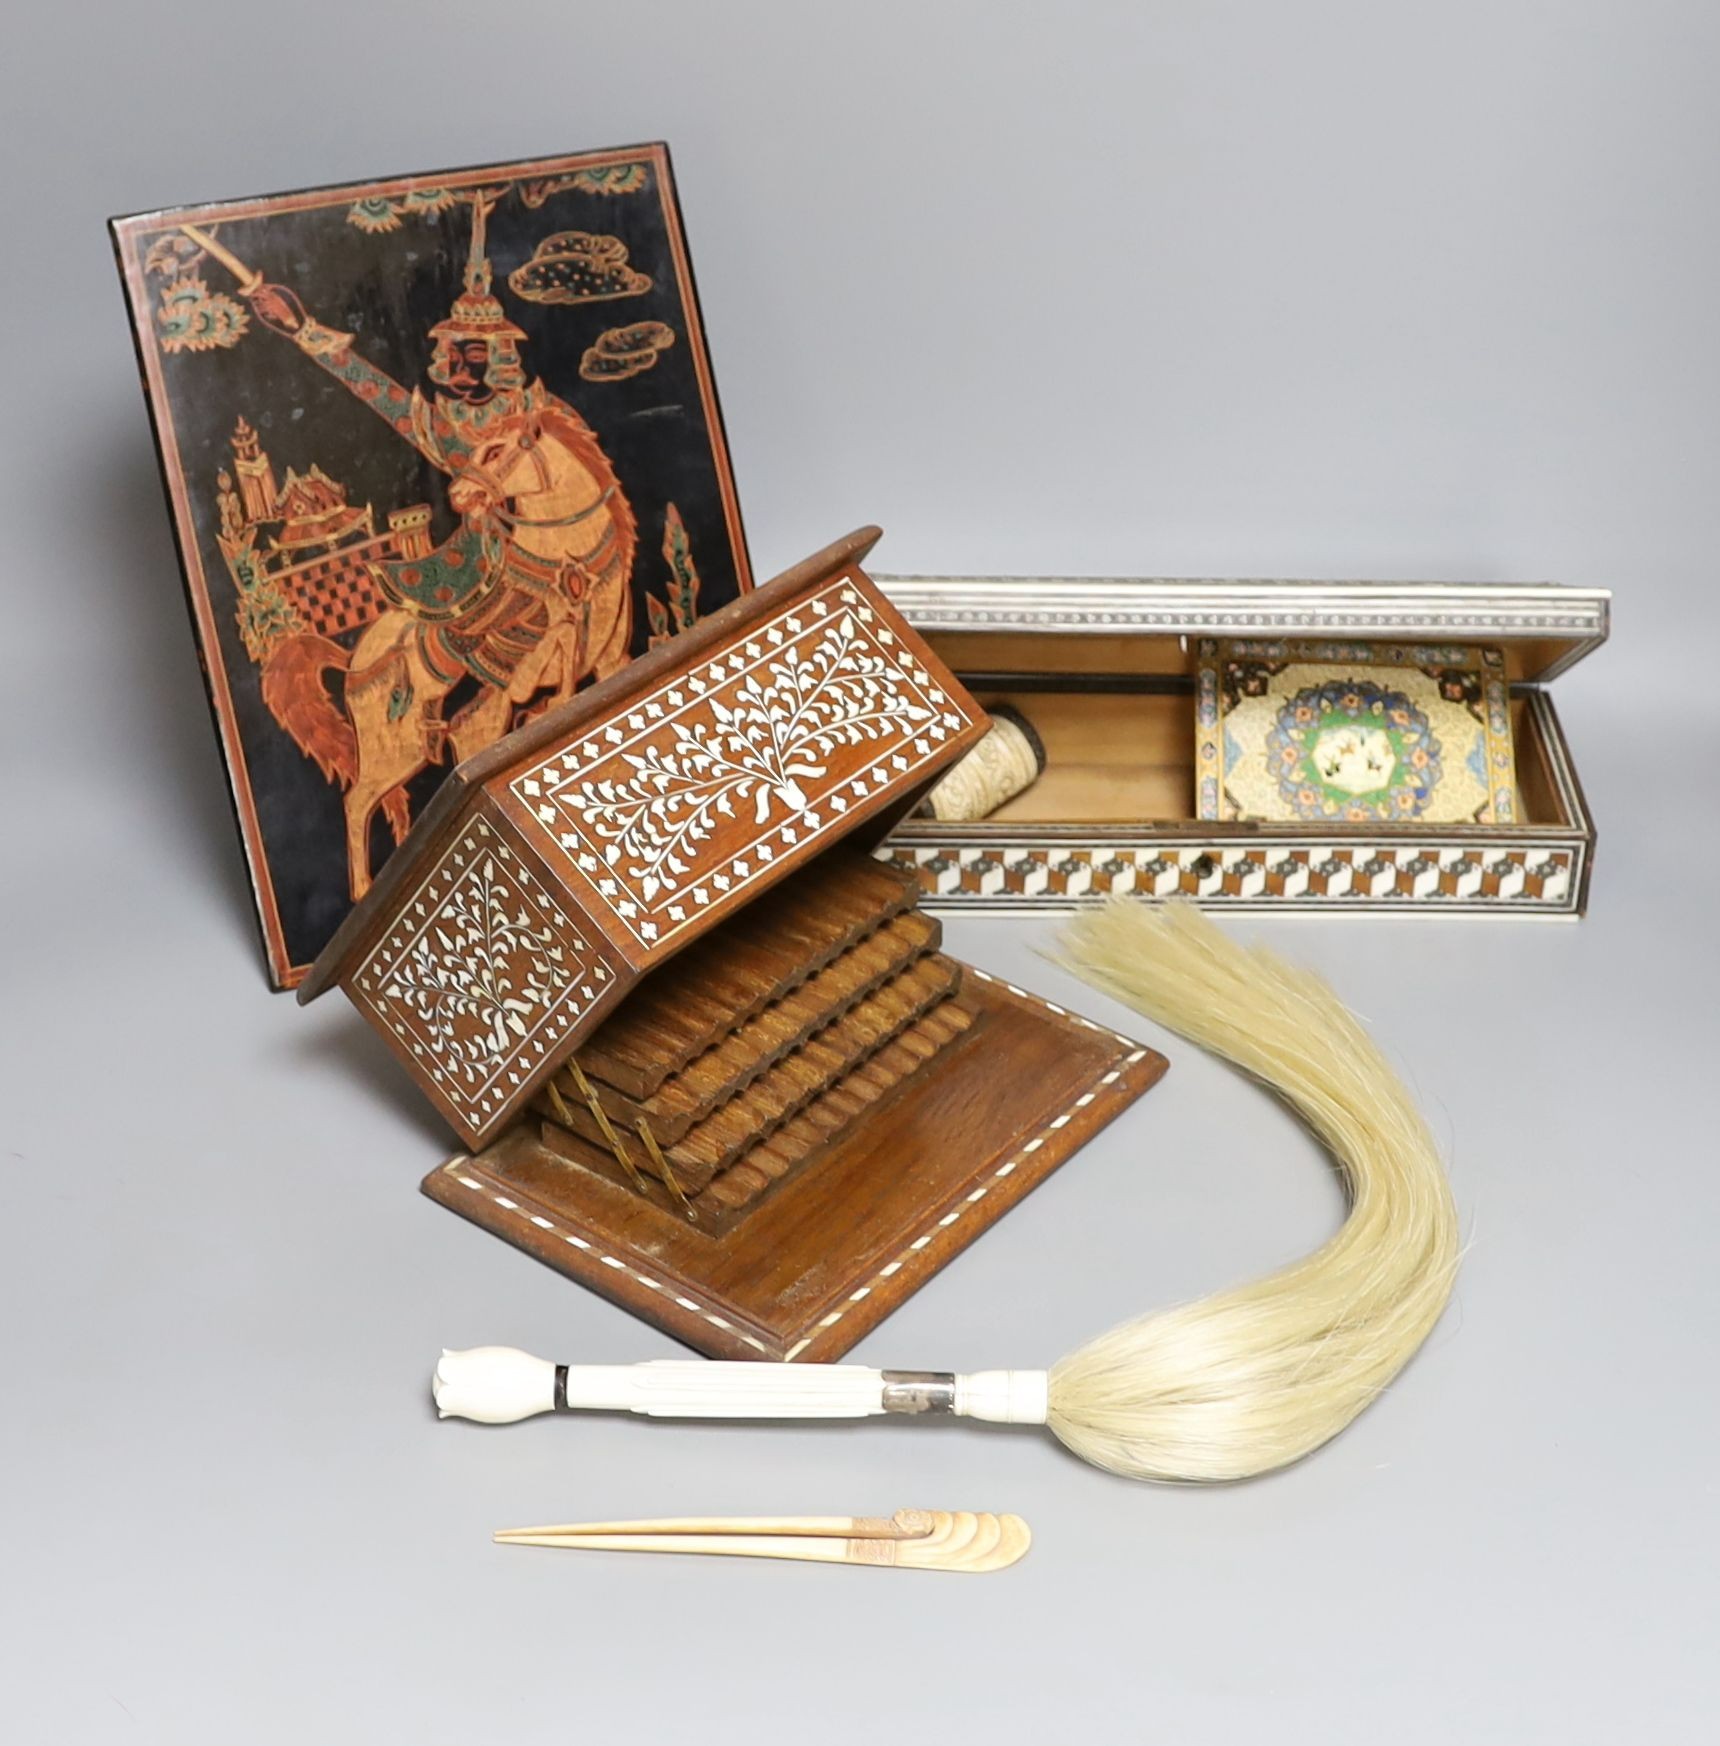 A 19th century ivory handled fly whisk, ivory inlaid sandalwood glove box, carved bone snuff box, bone inlaid cigarette box, a Burmese lacquer panel and a Persian painted ivorine panel